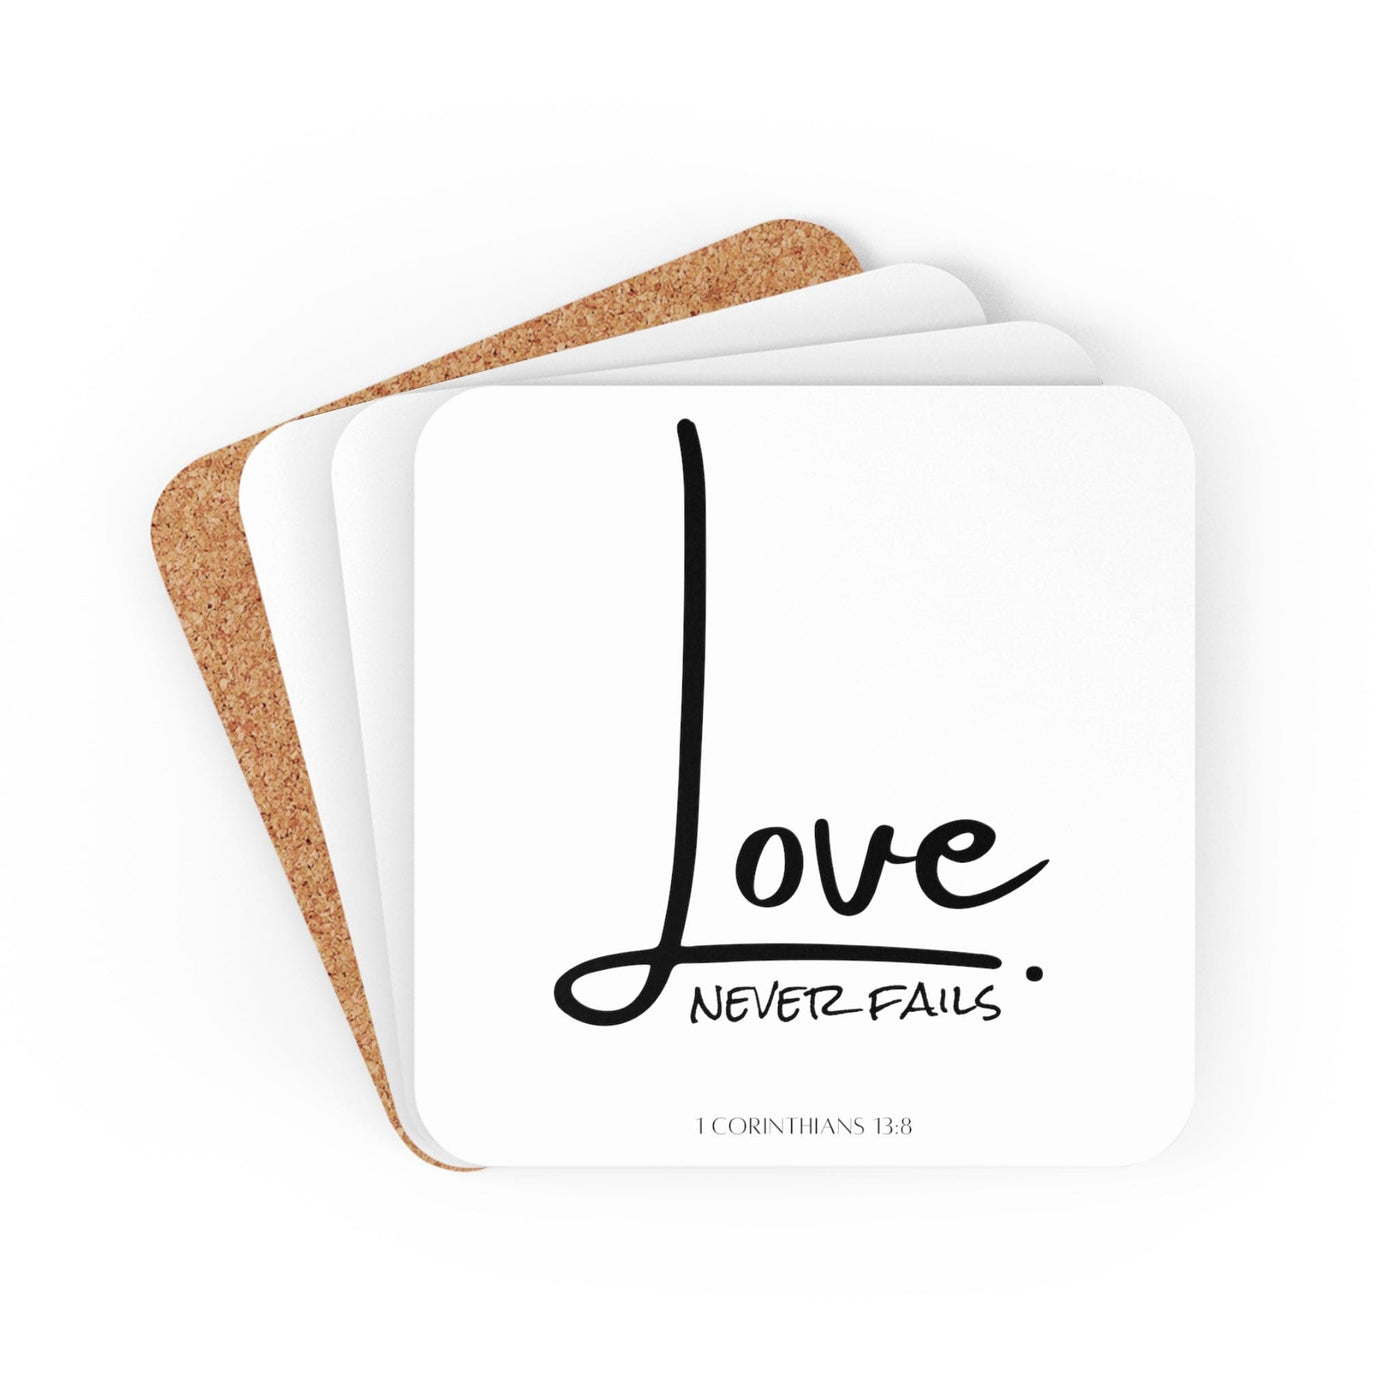 Handcrafted Square Coaster Set Of 4 For Drinks And Cups Love Never Fails